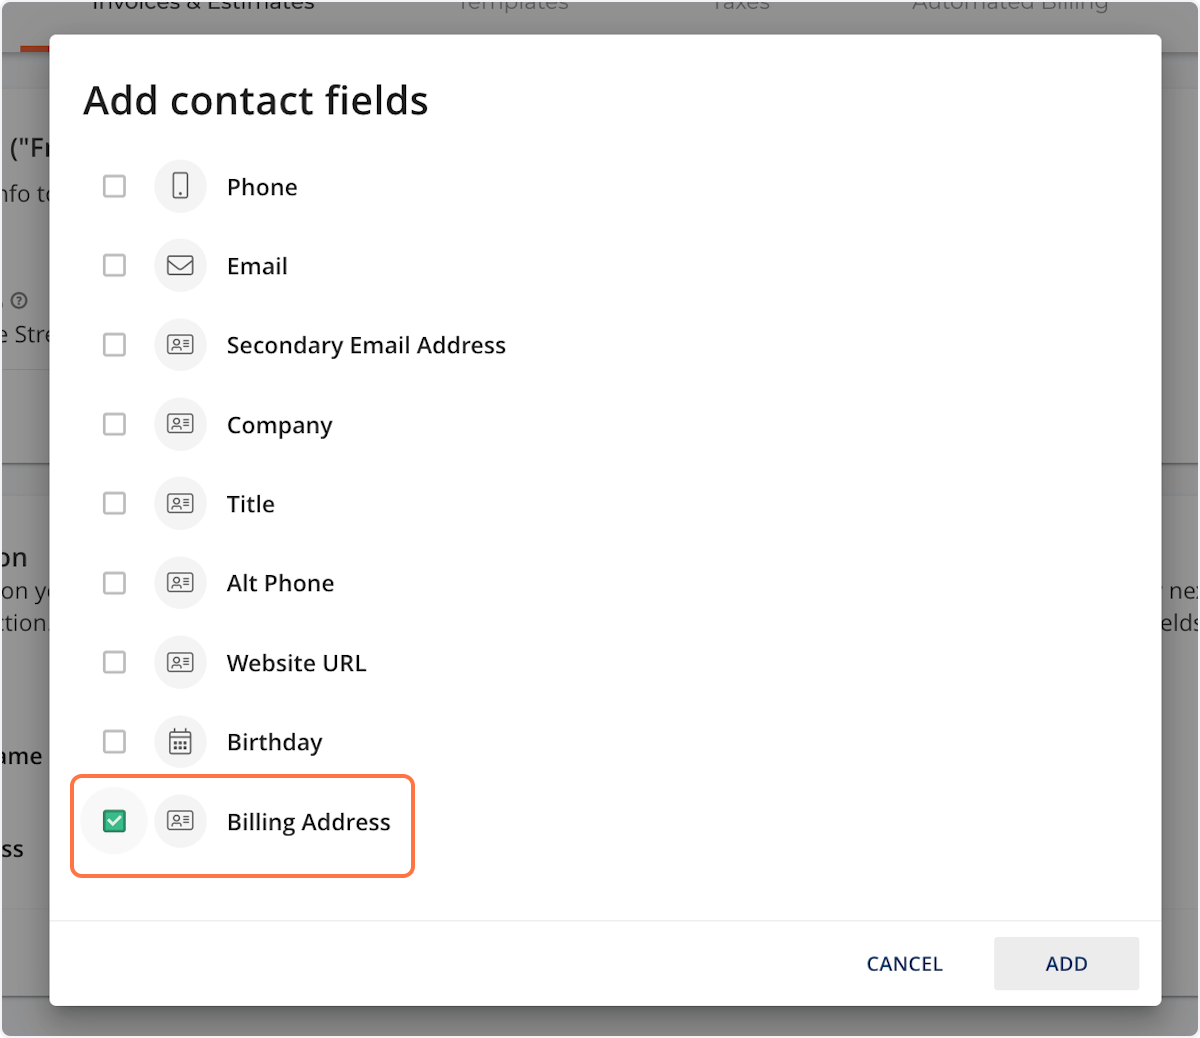 Check the box for any fields you also wish to be included on the invoices